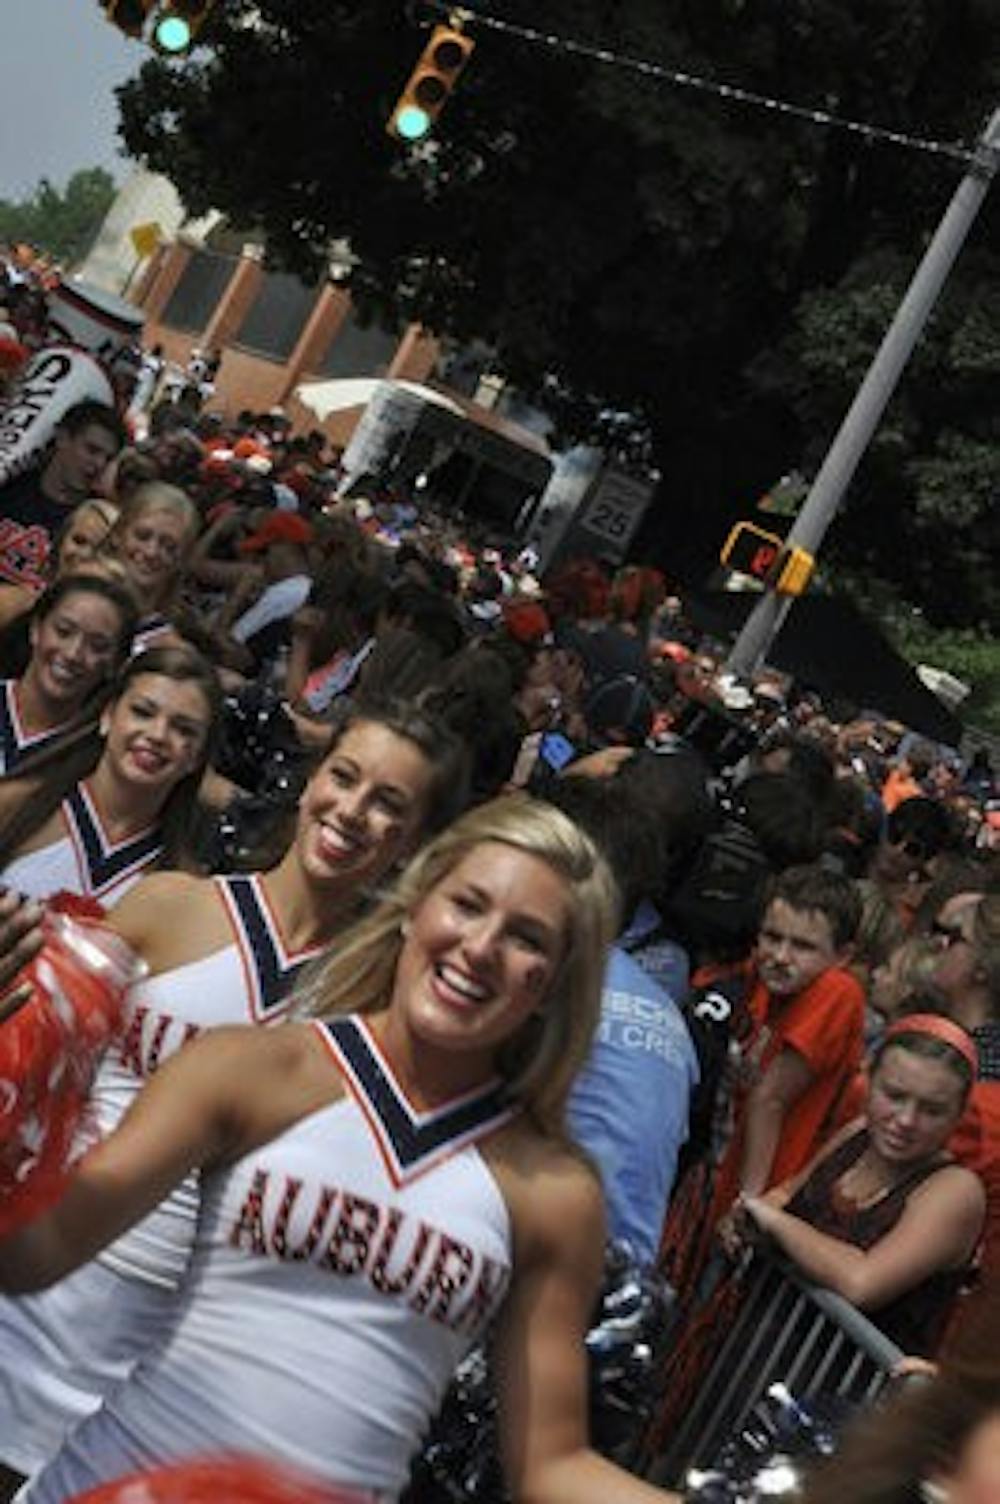 At Tiger Walk, fans and cheerleaders enjoy the atmosphere of anticipation and celebration of Tiger football before the Tigers' win against Washington State Aug. 31. (Anna Grafton / Photo Editor)